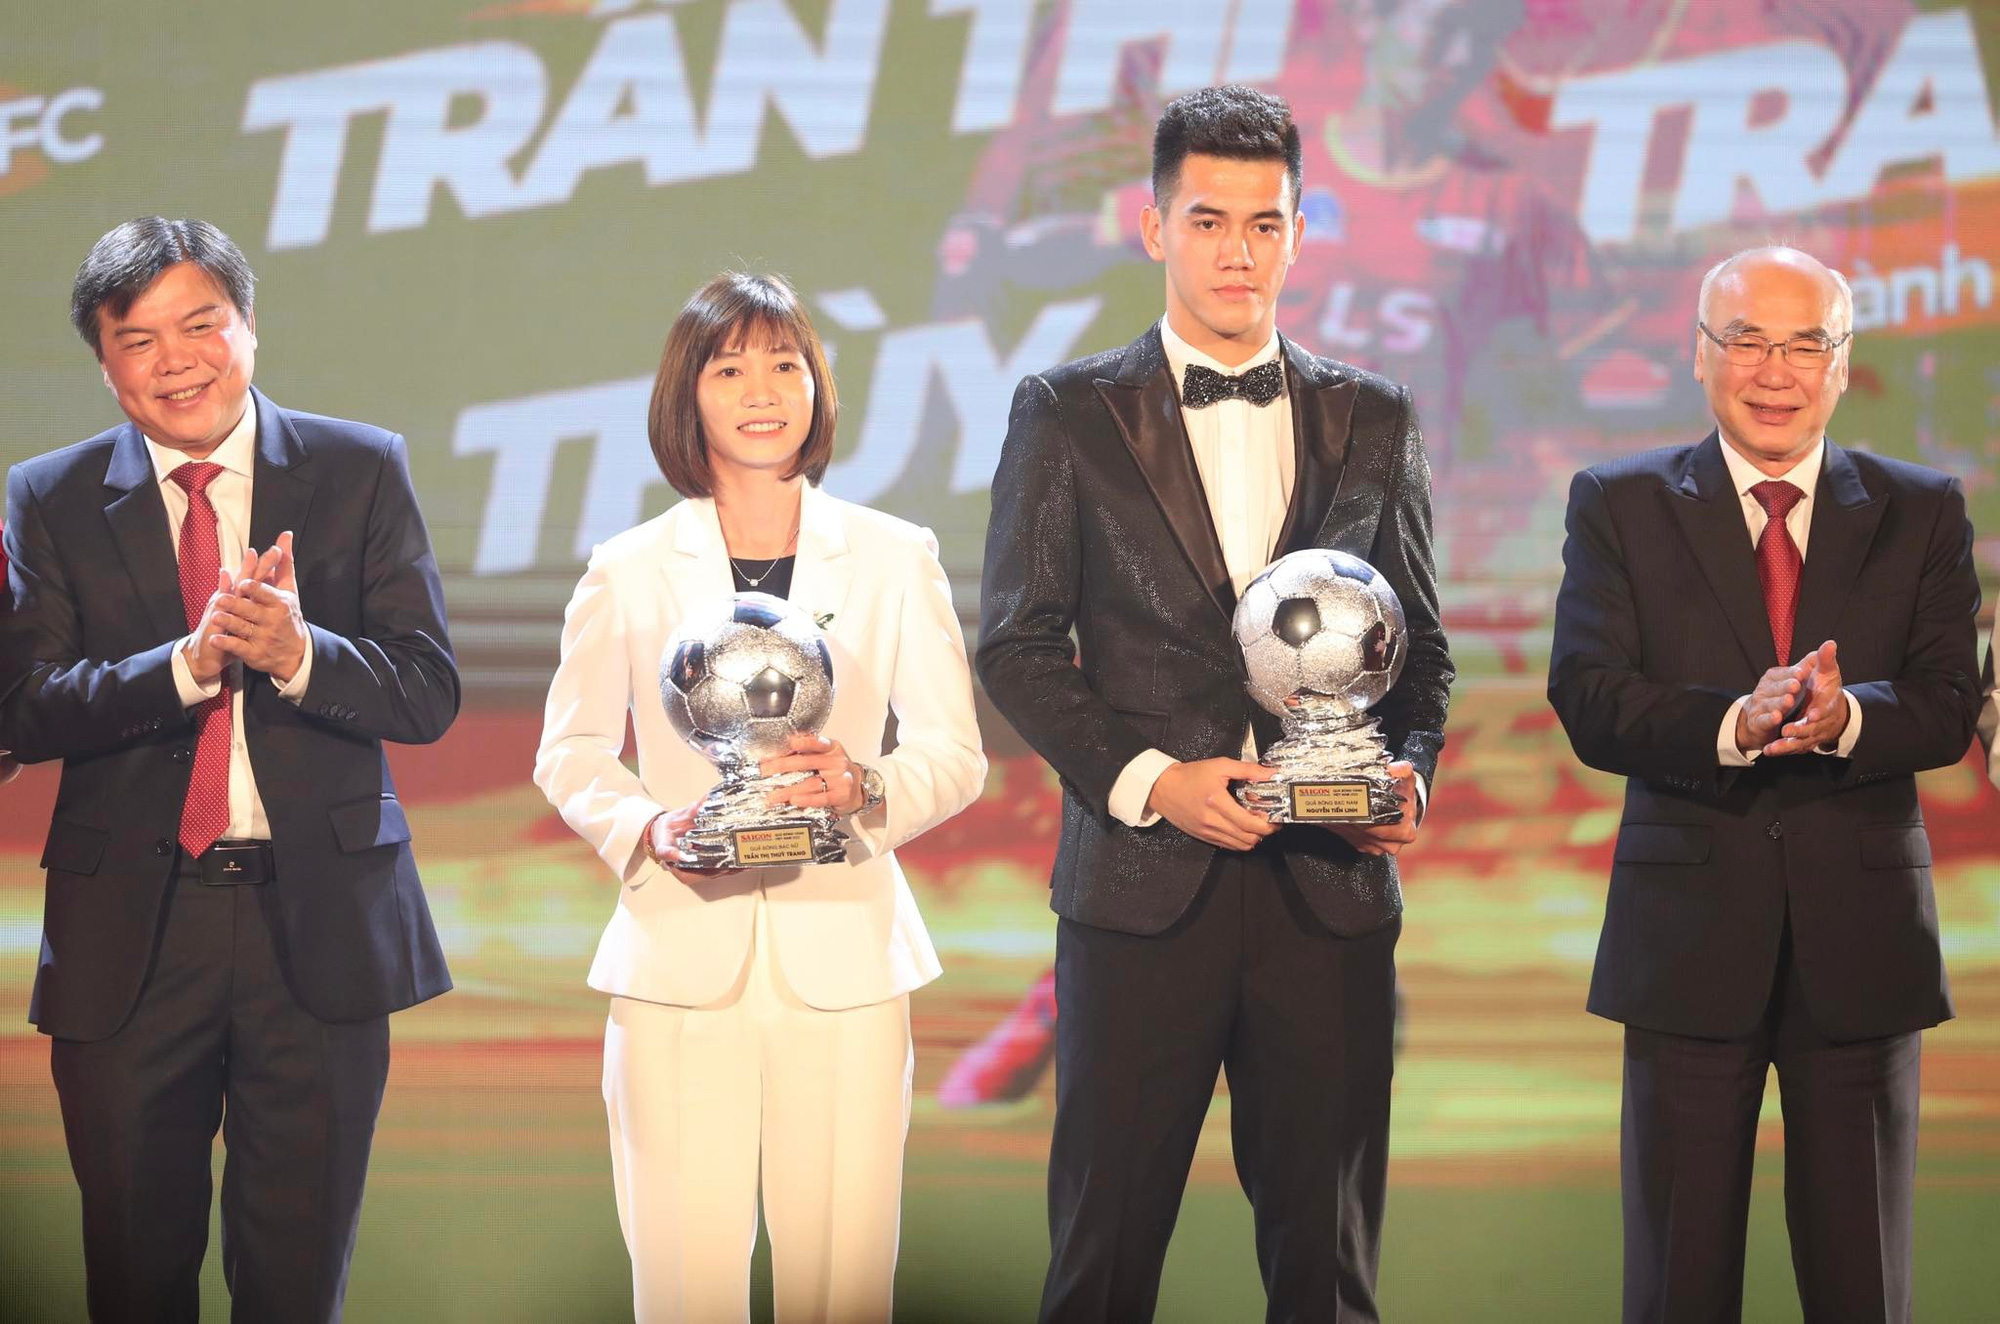 Nguyen Tien Linh (R, 2nd) and Tran Thi Thuy Trang (L, 2nd) receive the Silver Ball, February 25, 2023. Photo: Nguyen Khoi / Tuoi Tre